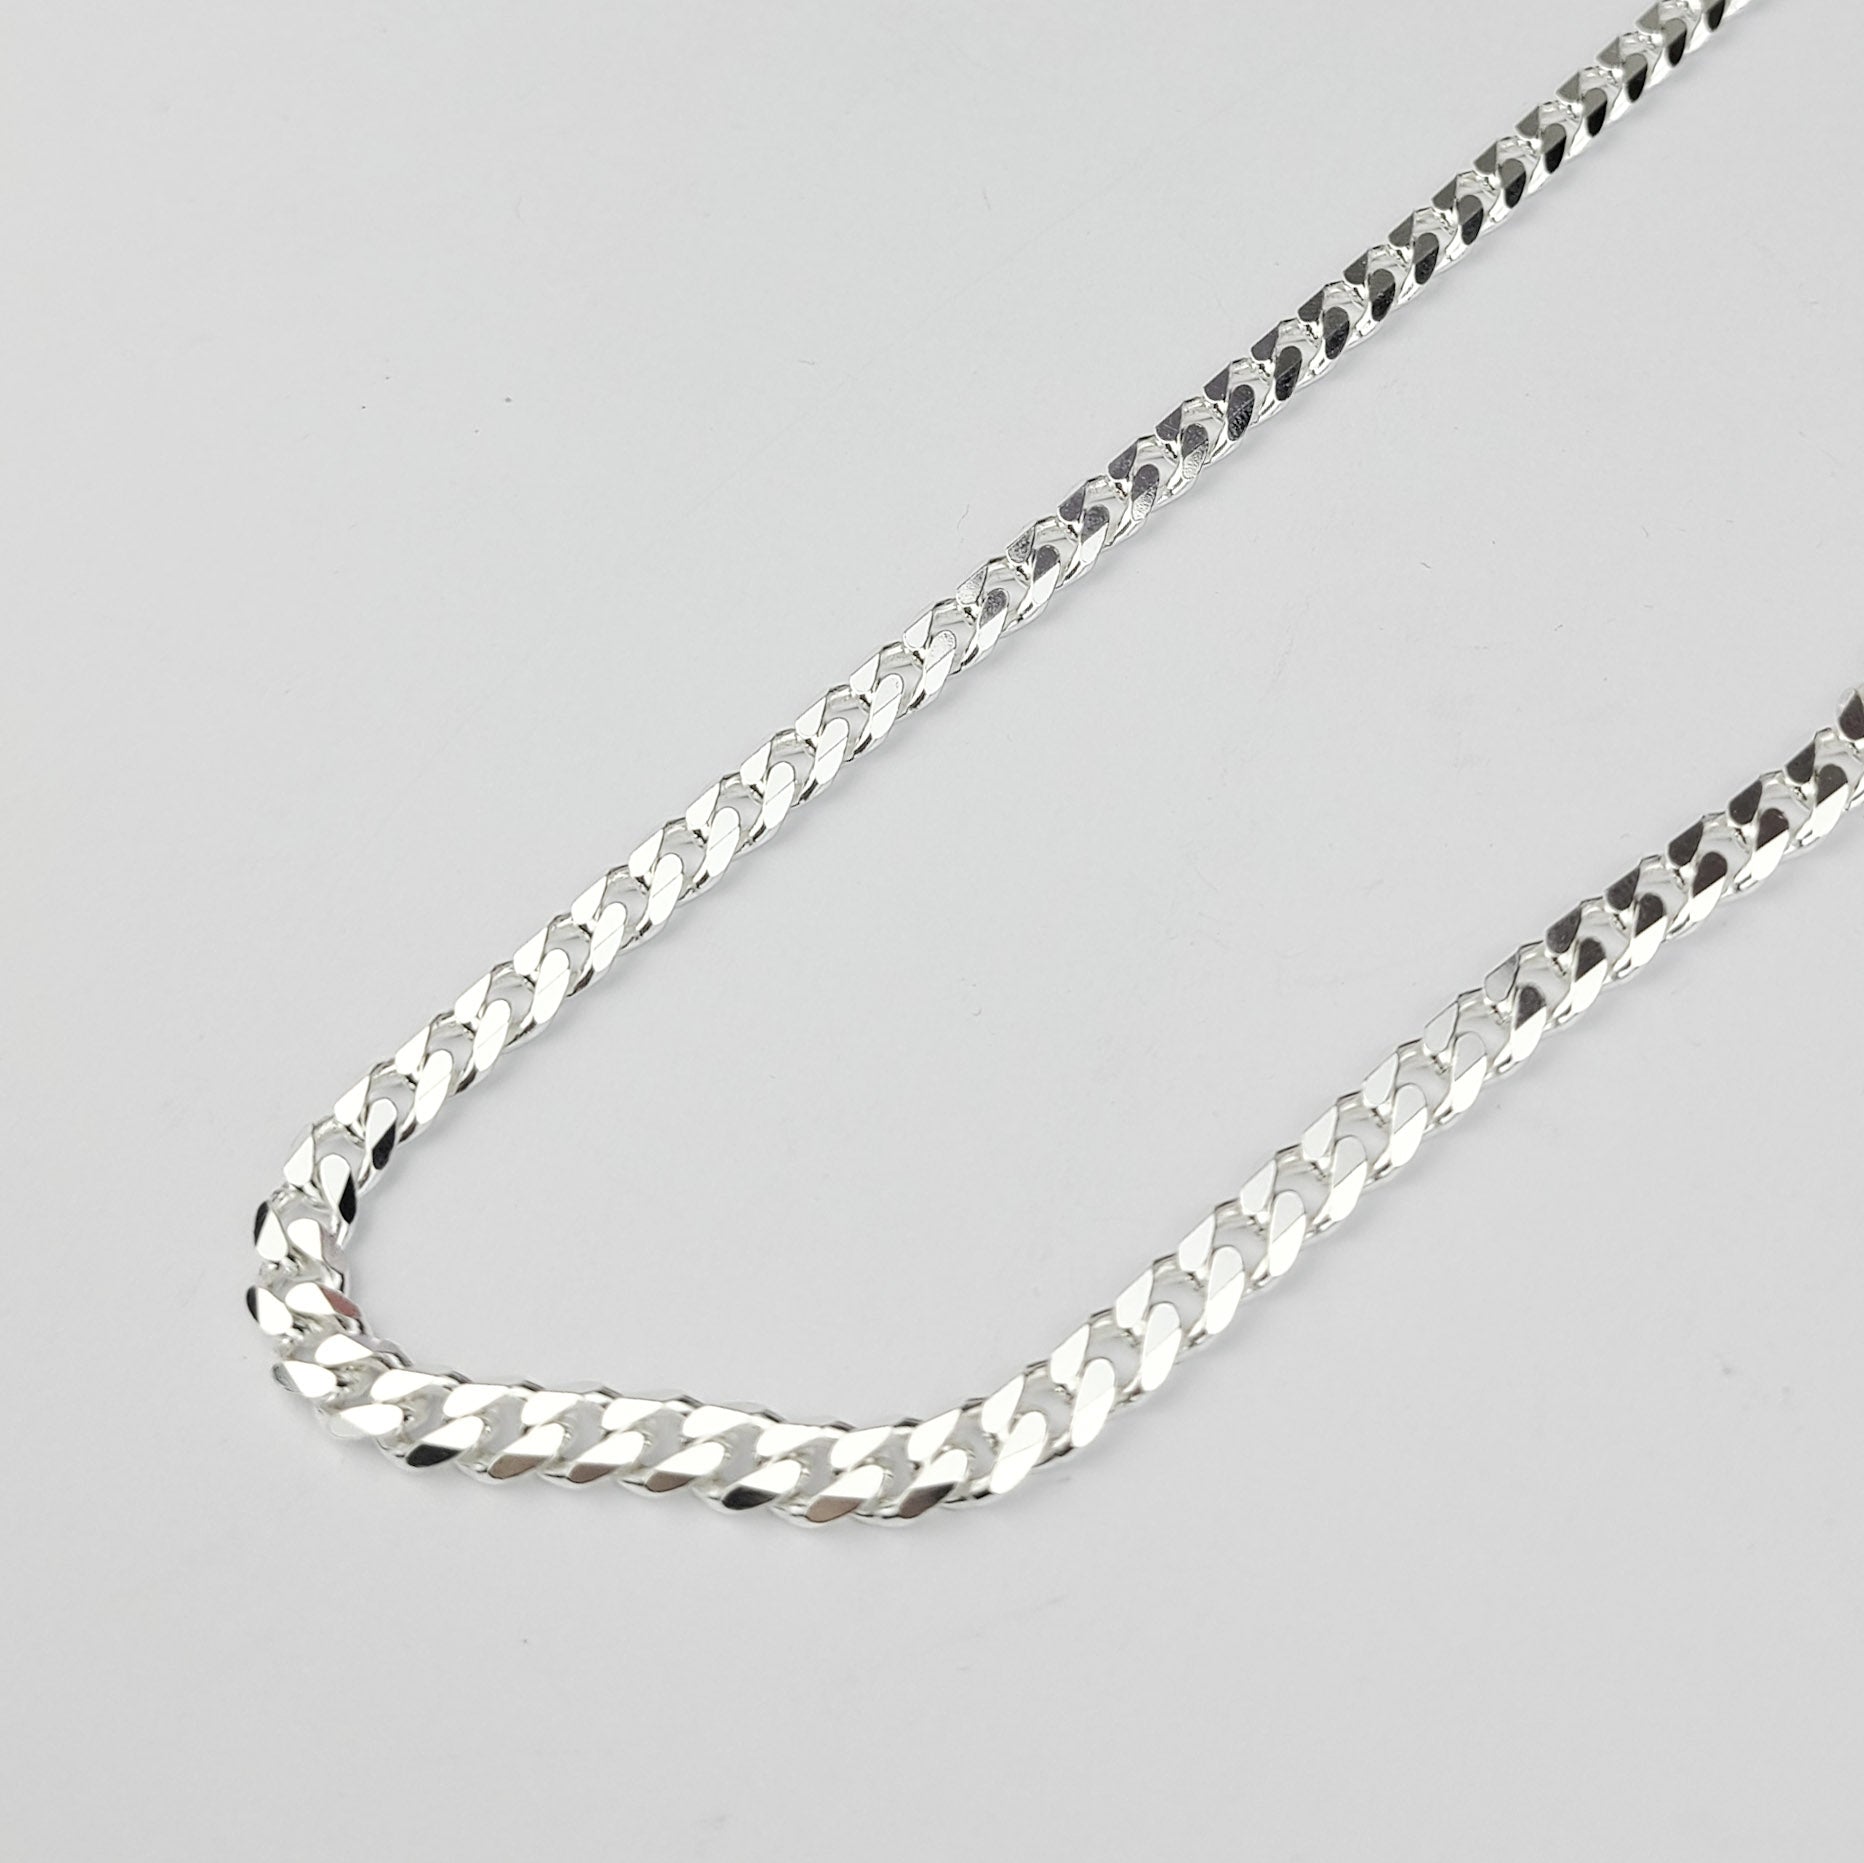 The Black Bow Men's 6.8mm Sterling Silver Solid Flat Curb Chain Necklace,  16 Inch | Amazon.com